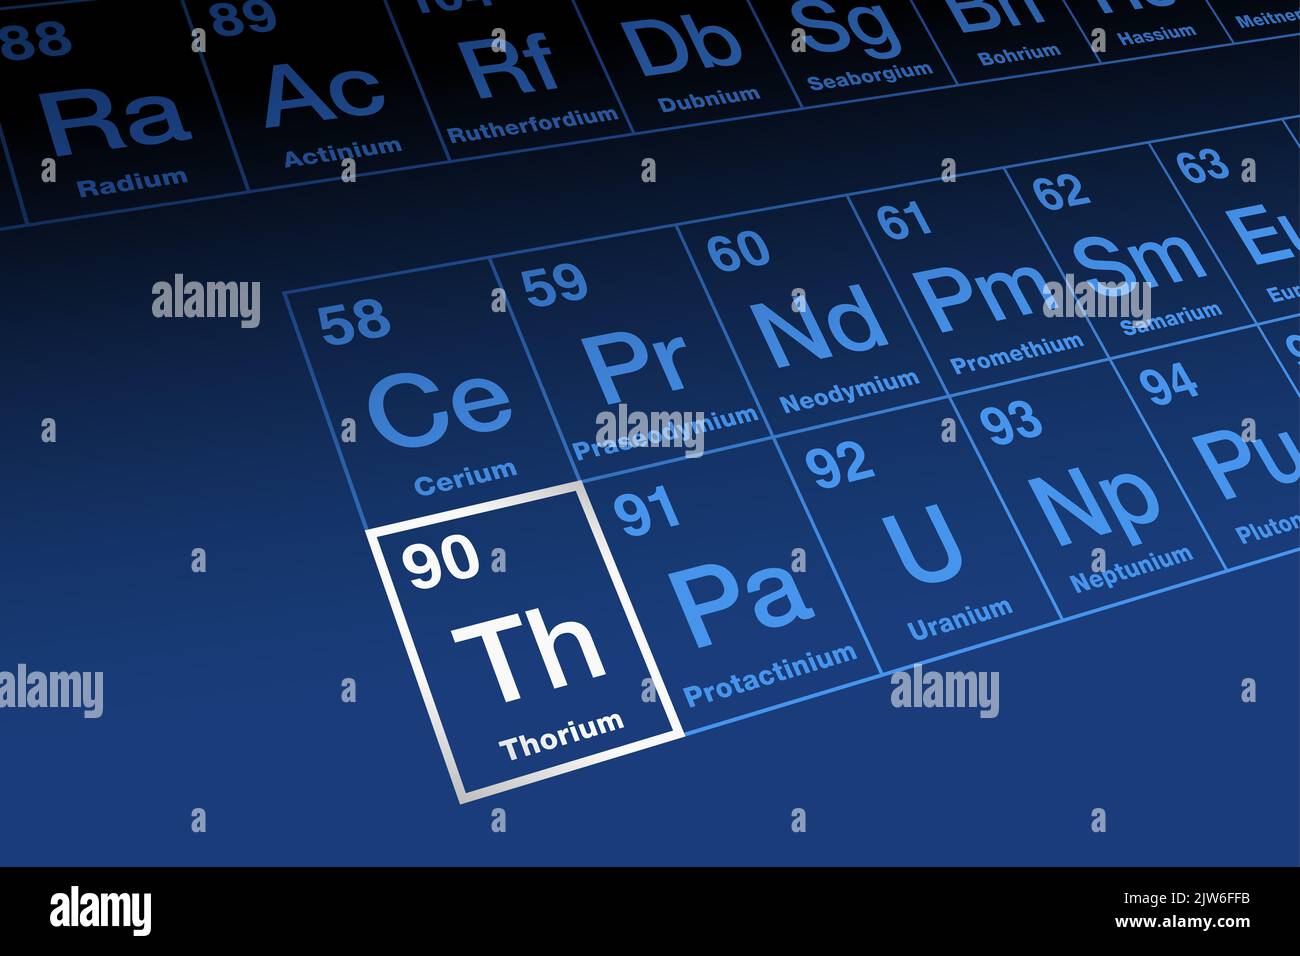 Thorium, on periodic table of the elements, in the actinide series. Radioactive metallic element with atomic number 90, and symbol Th. Stock Photo